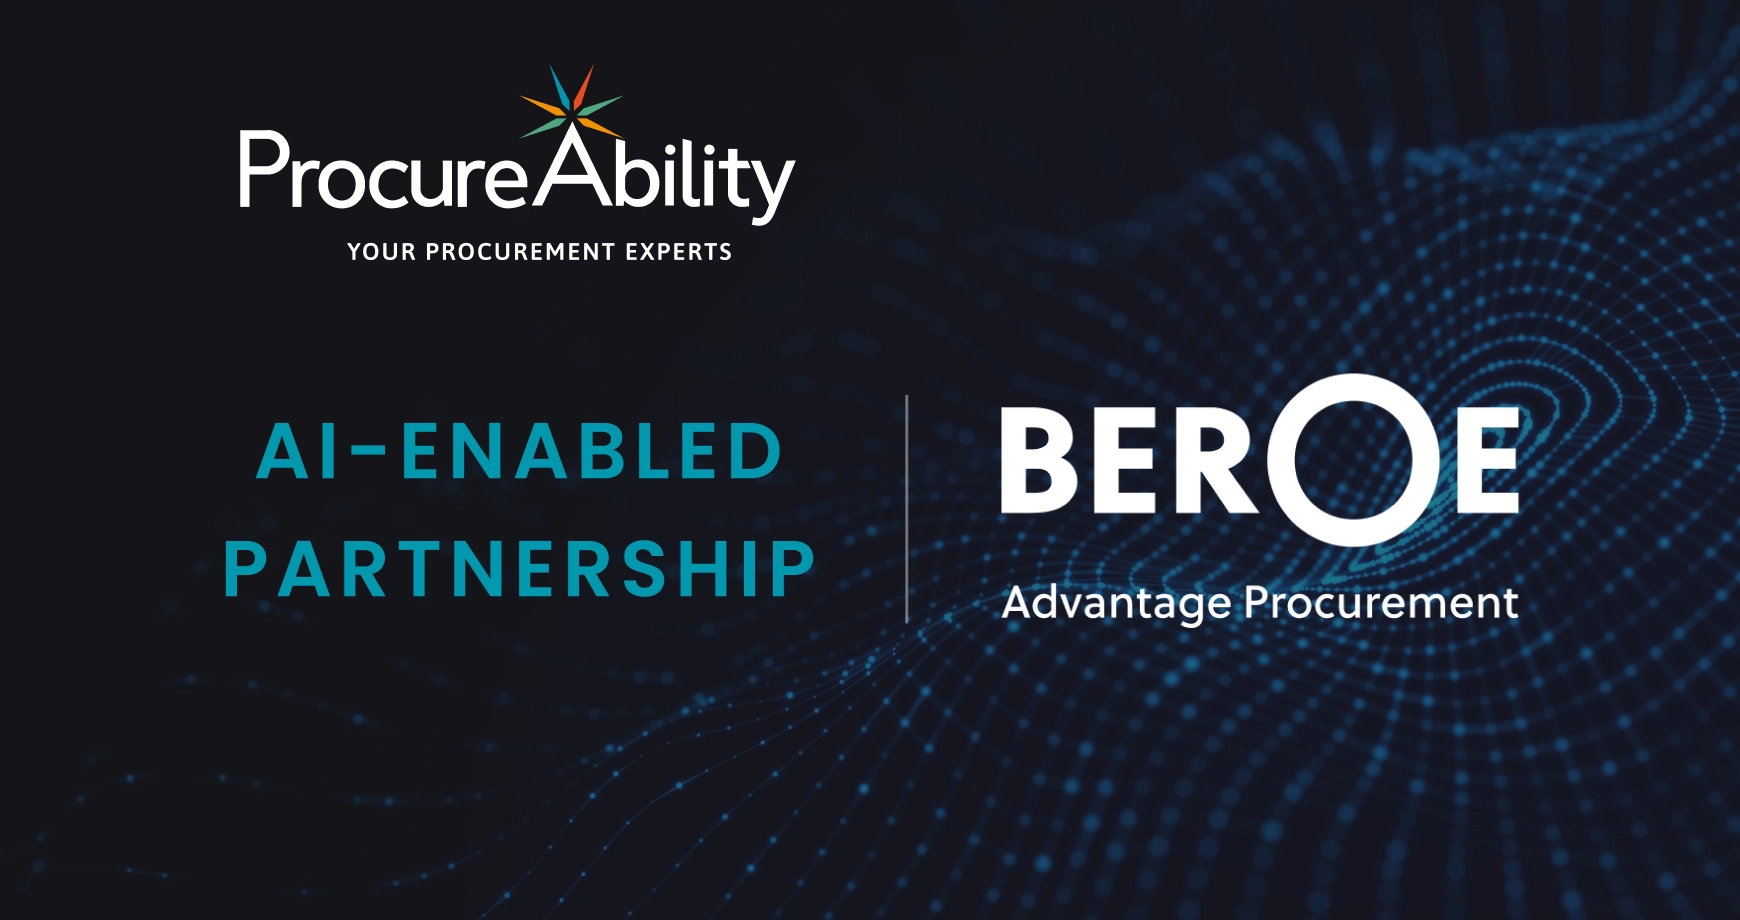 Beroe and ProcureAbility Partner to Provide the Utilities Industry With AI-Enabled Market Intelligence